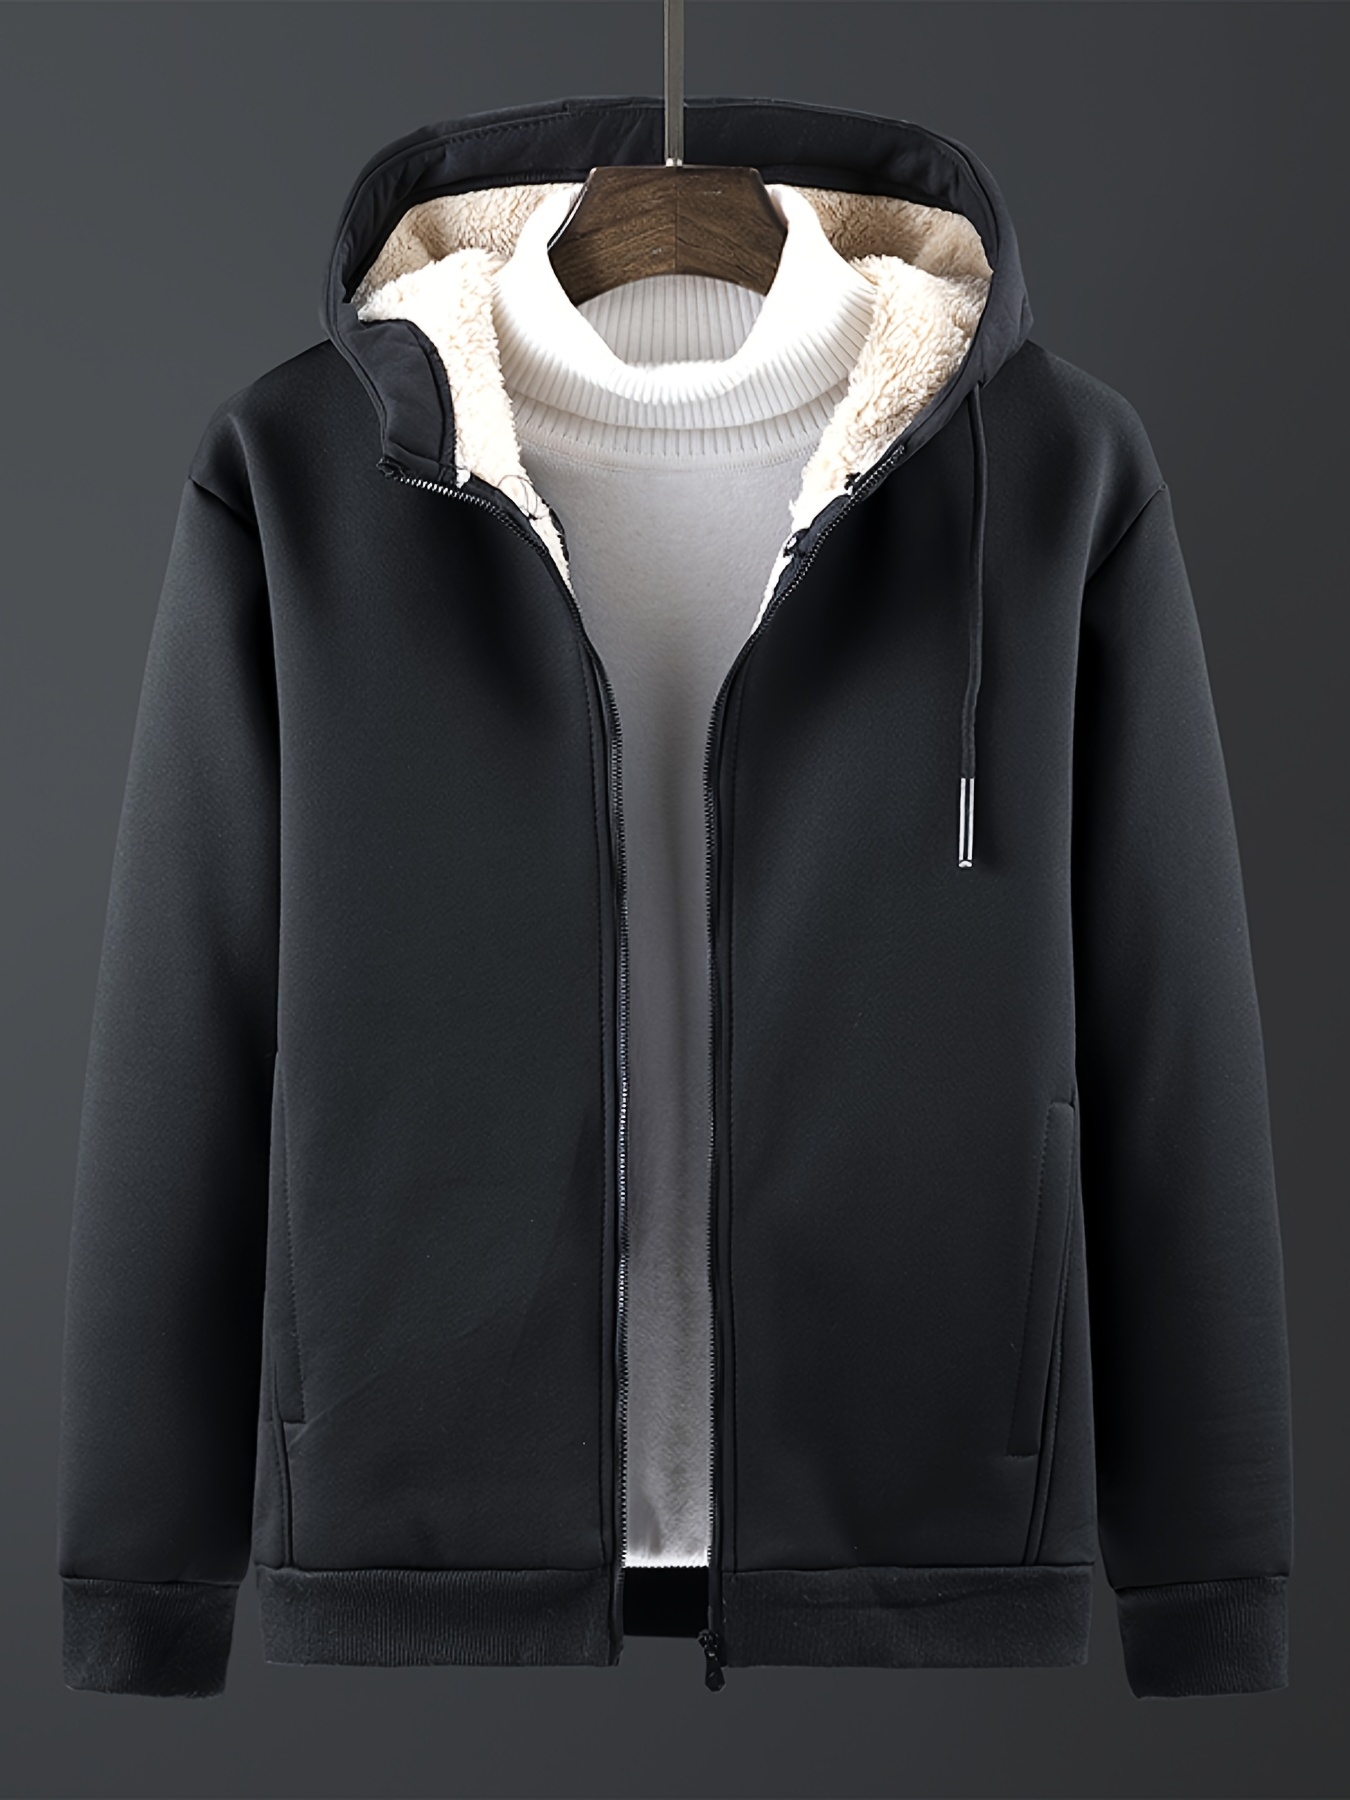 Solid Sherpa Lined Men's Fluffy Hooded Jacket Casual Polar - Temu